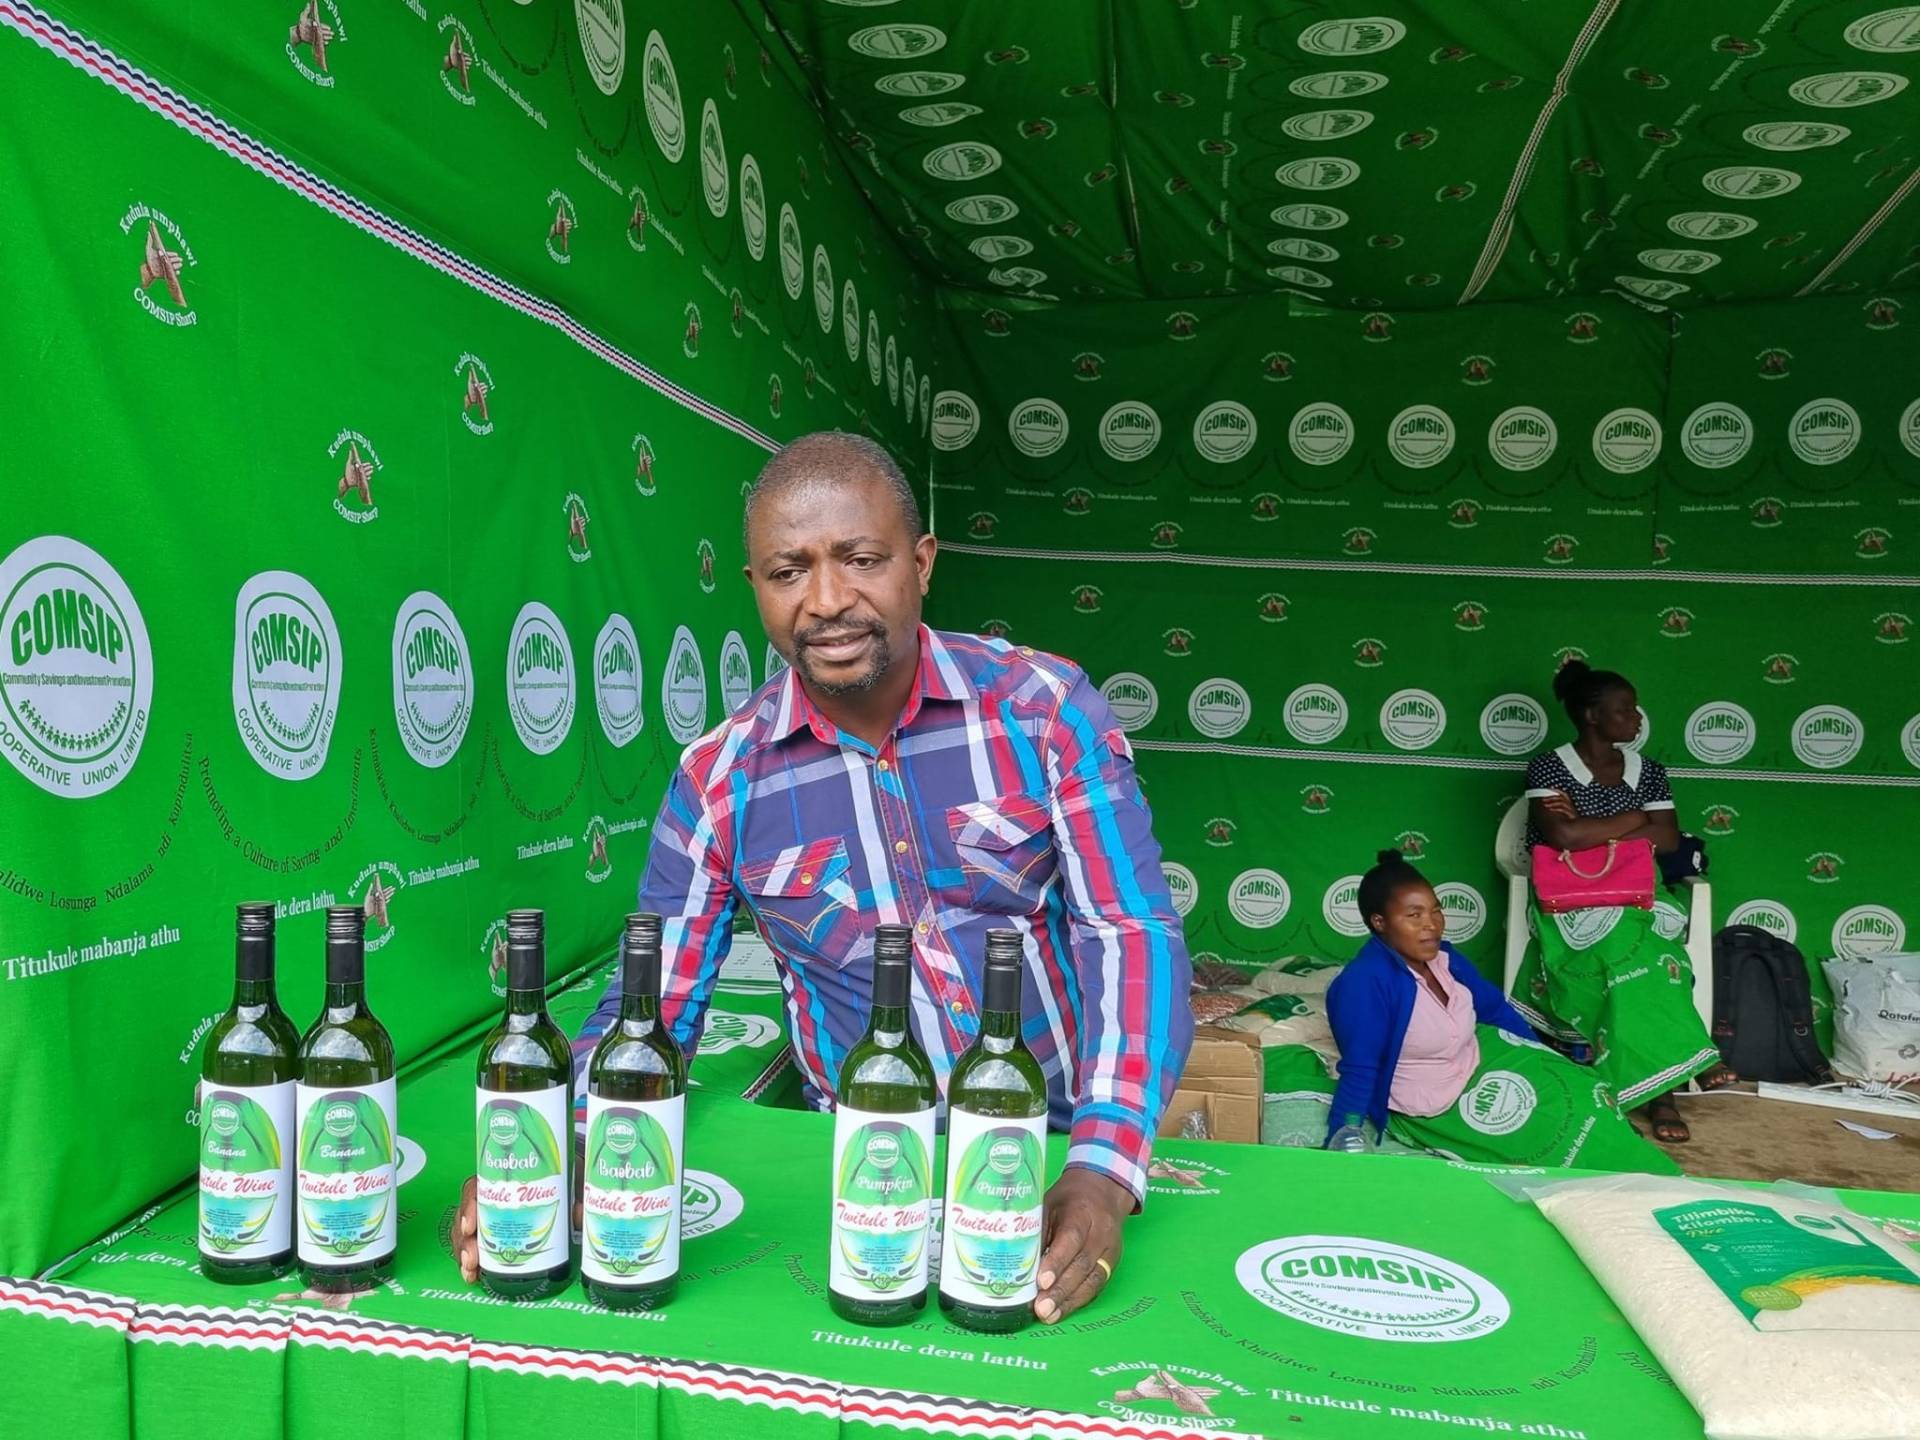 The Malawians braving climate shocks and red tape to make banana wine | Agriculture